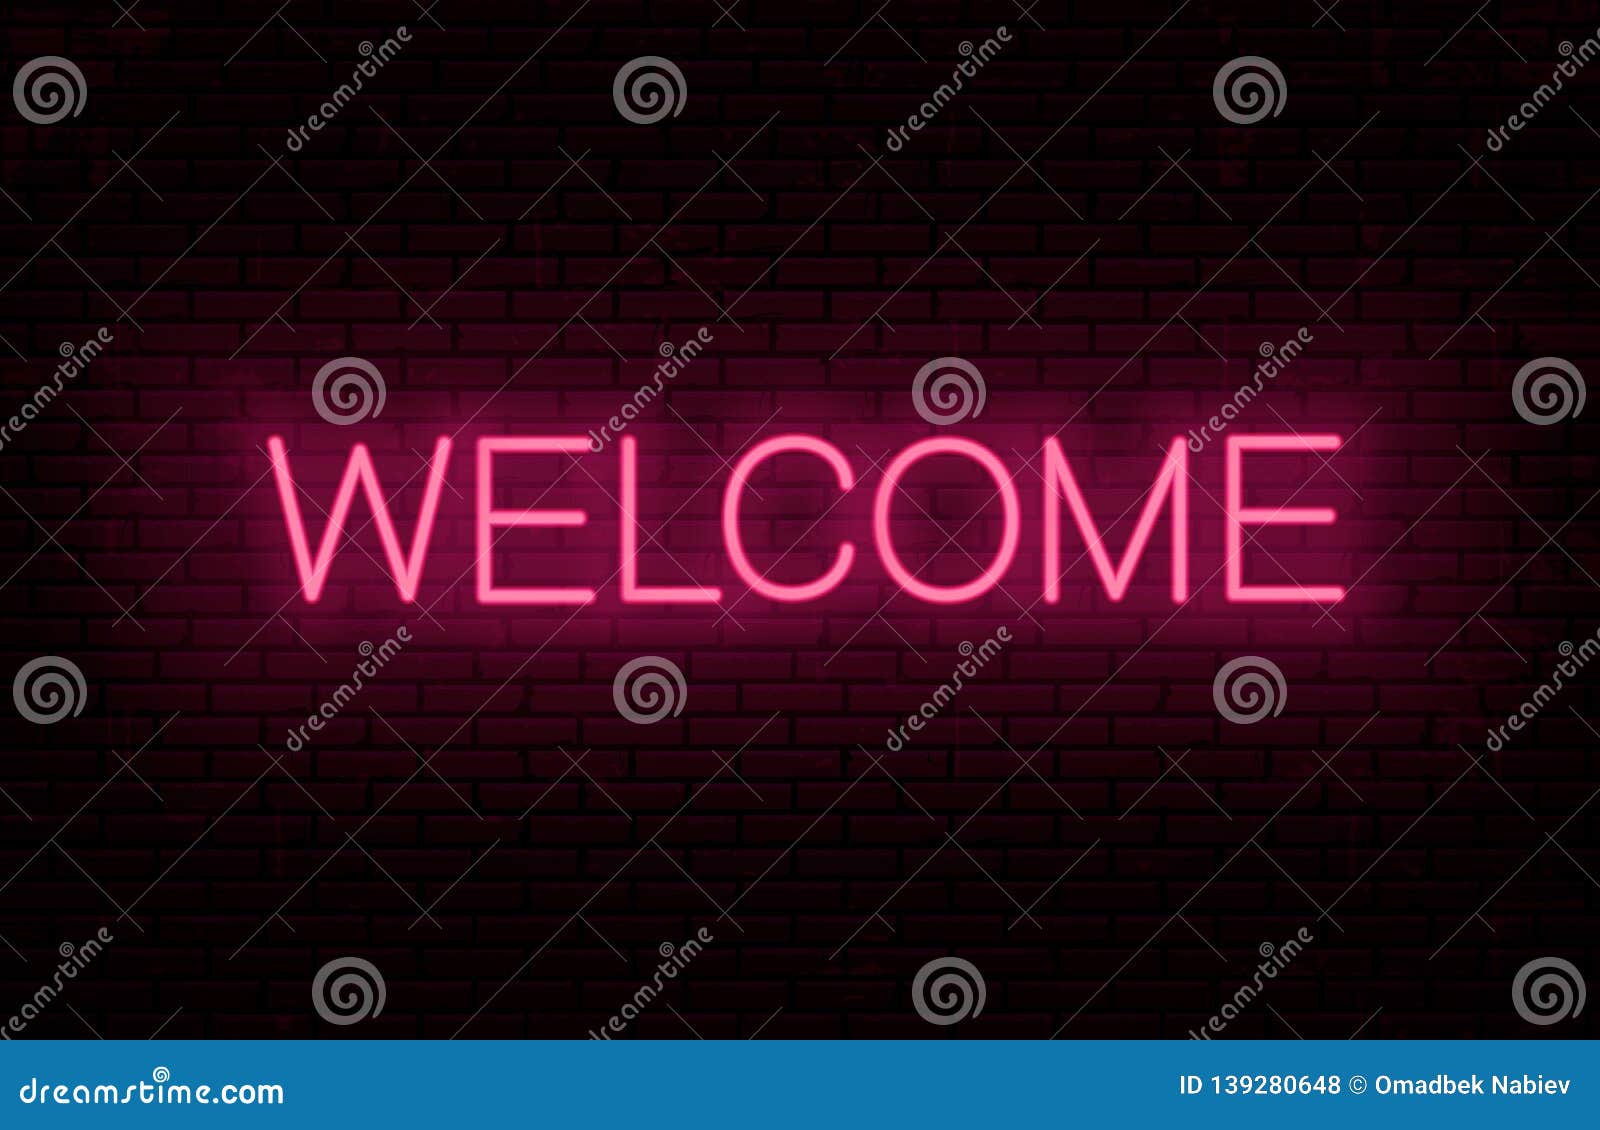 Welcome, Red Neon Inscription Stock Vector - Illustration of letter ...